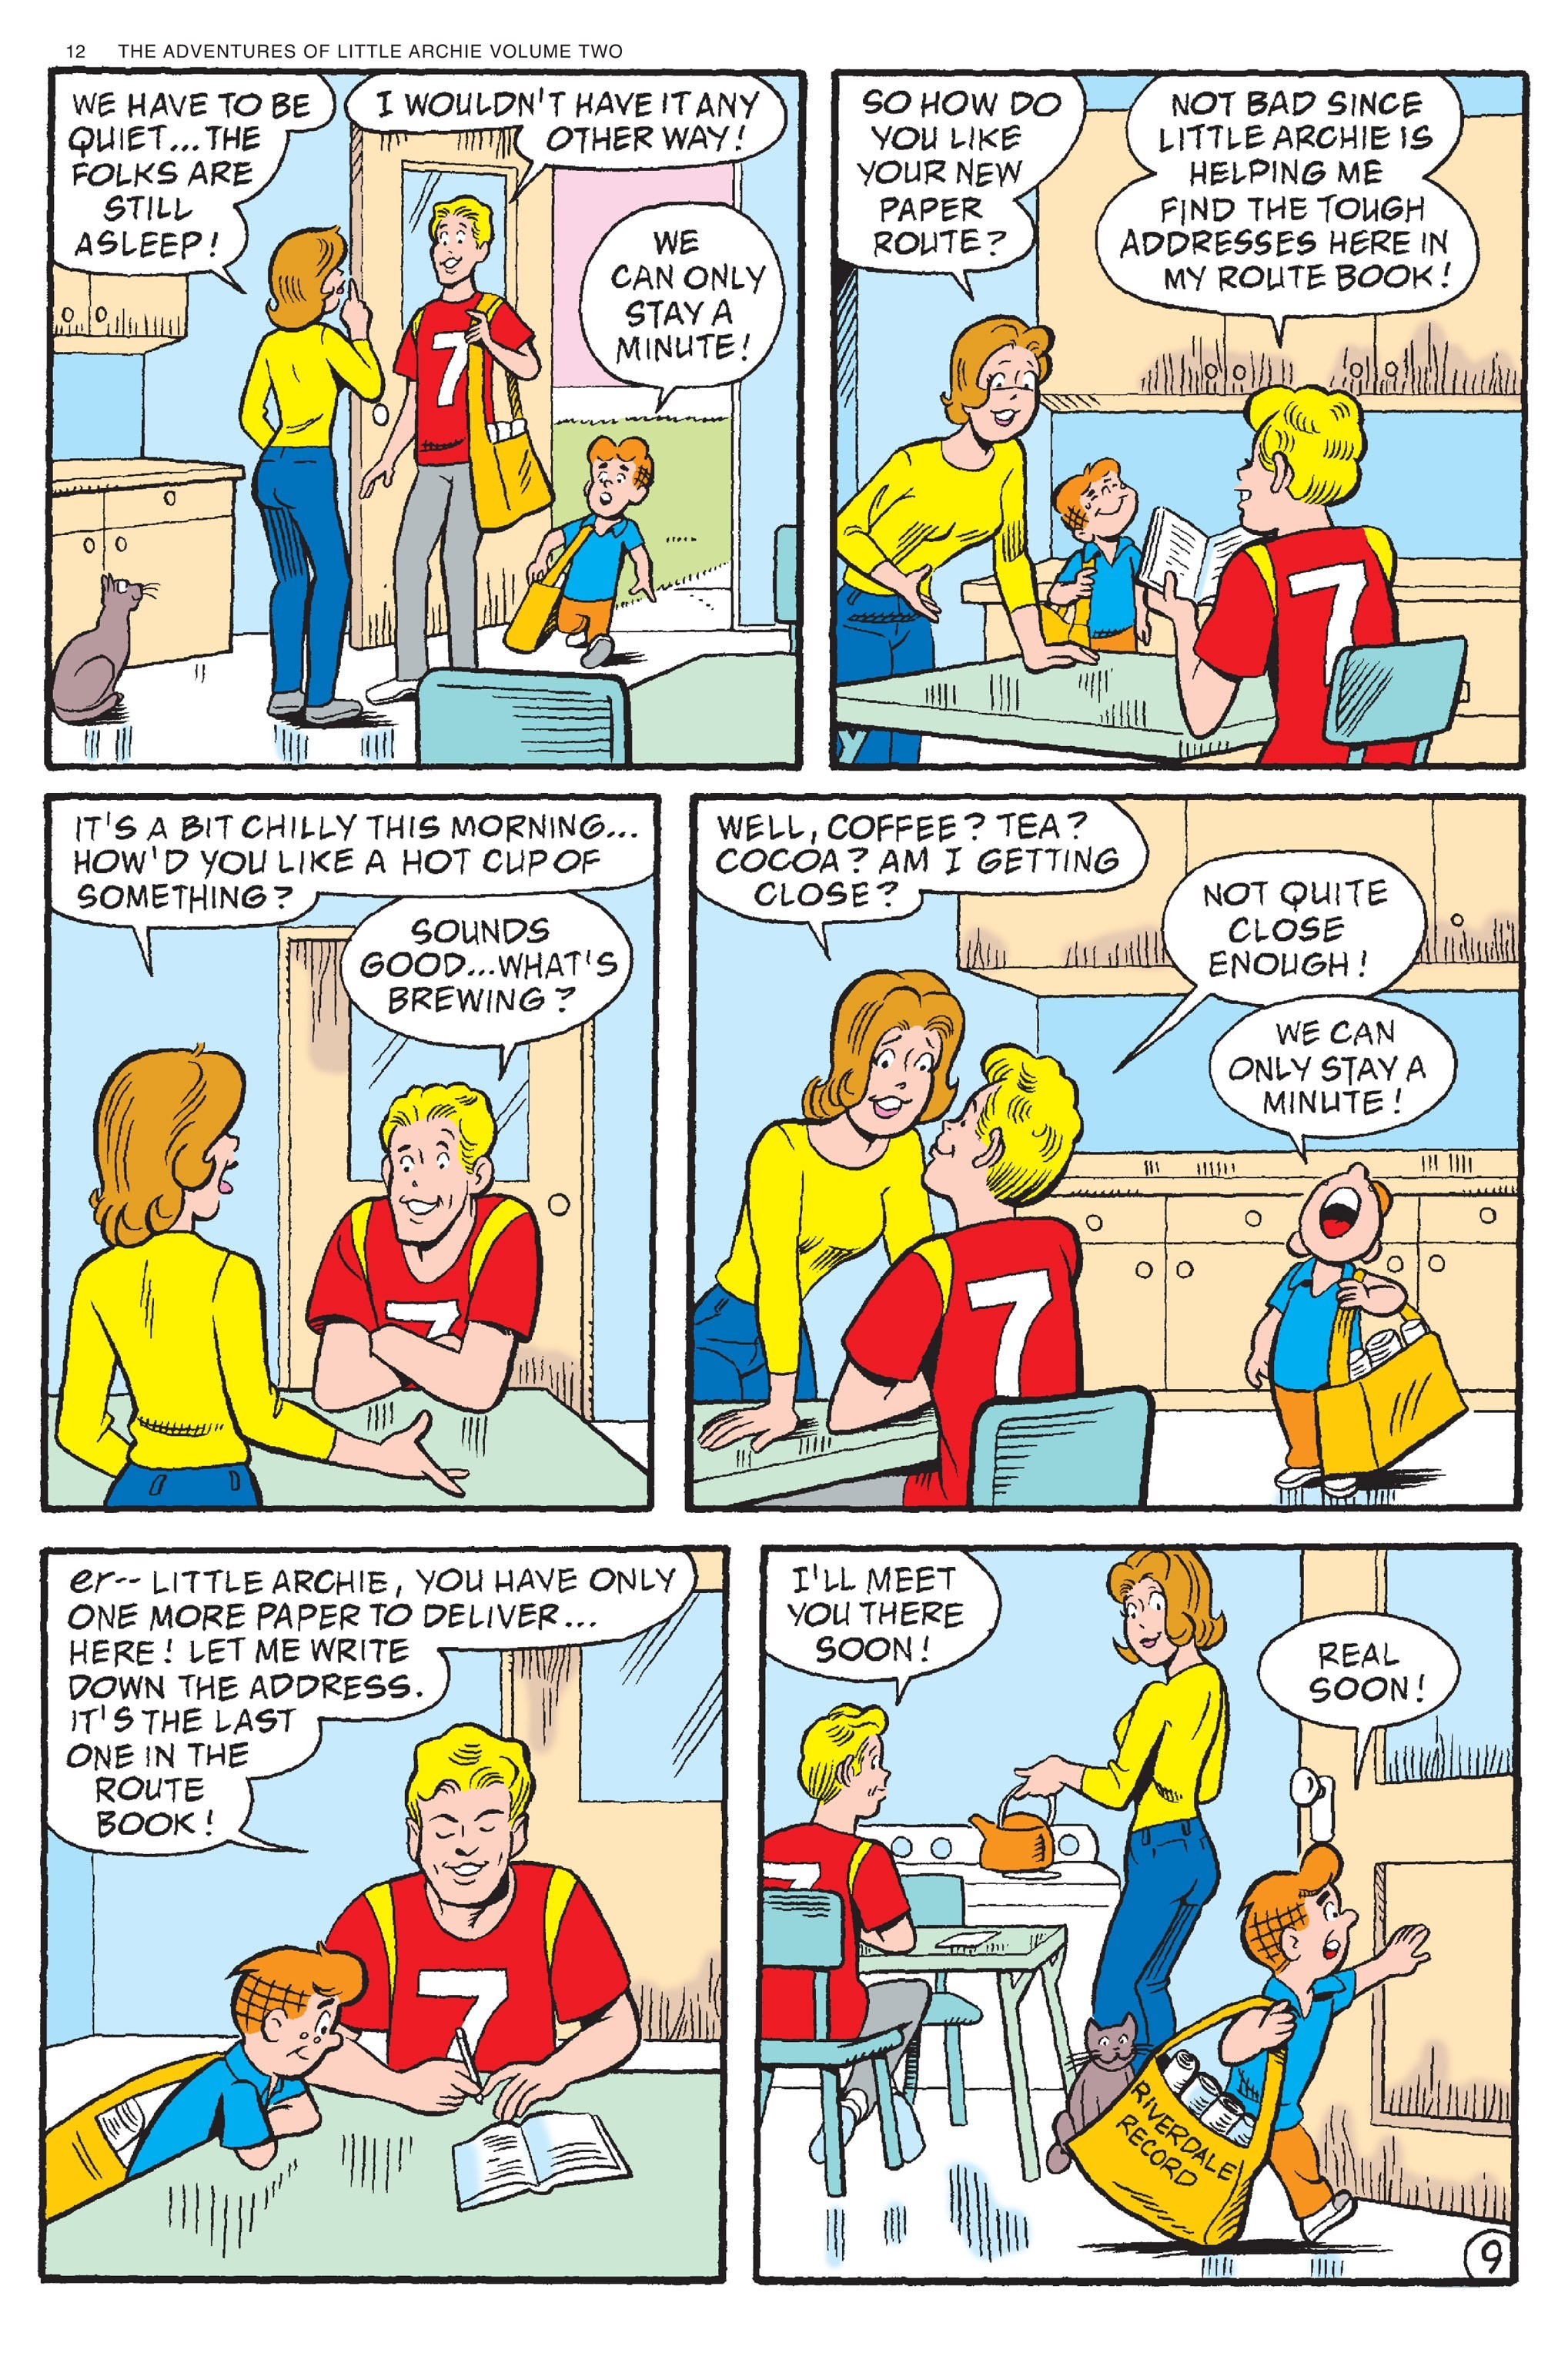 Read online Adventures of Little Archie comic -  Issue # TPB 2 - 13